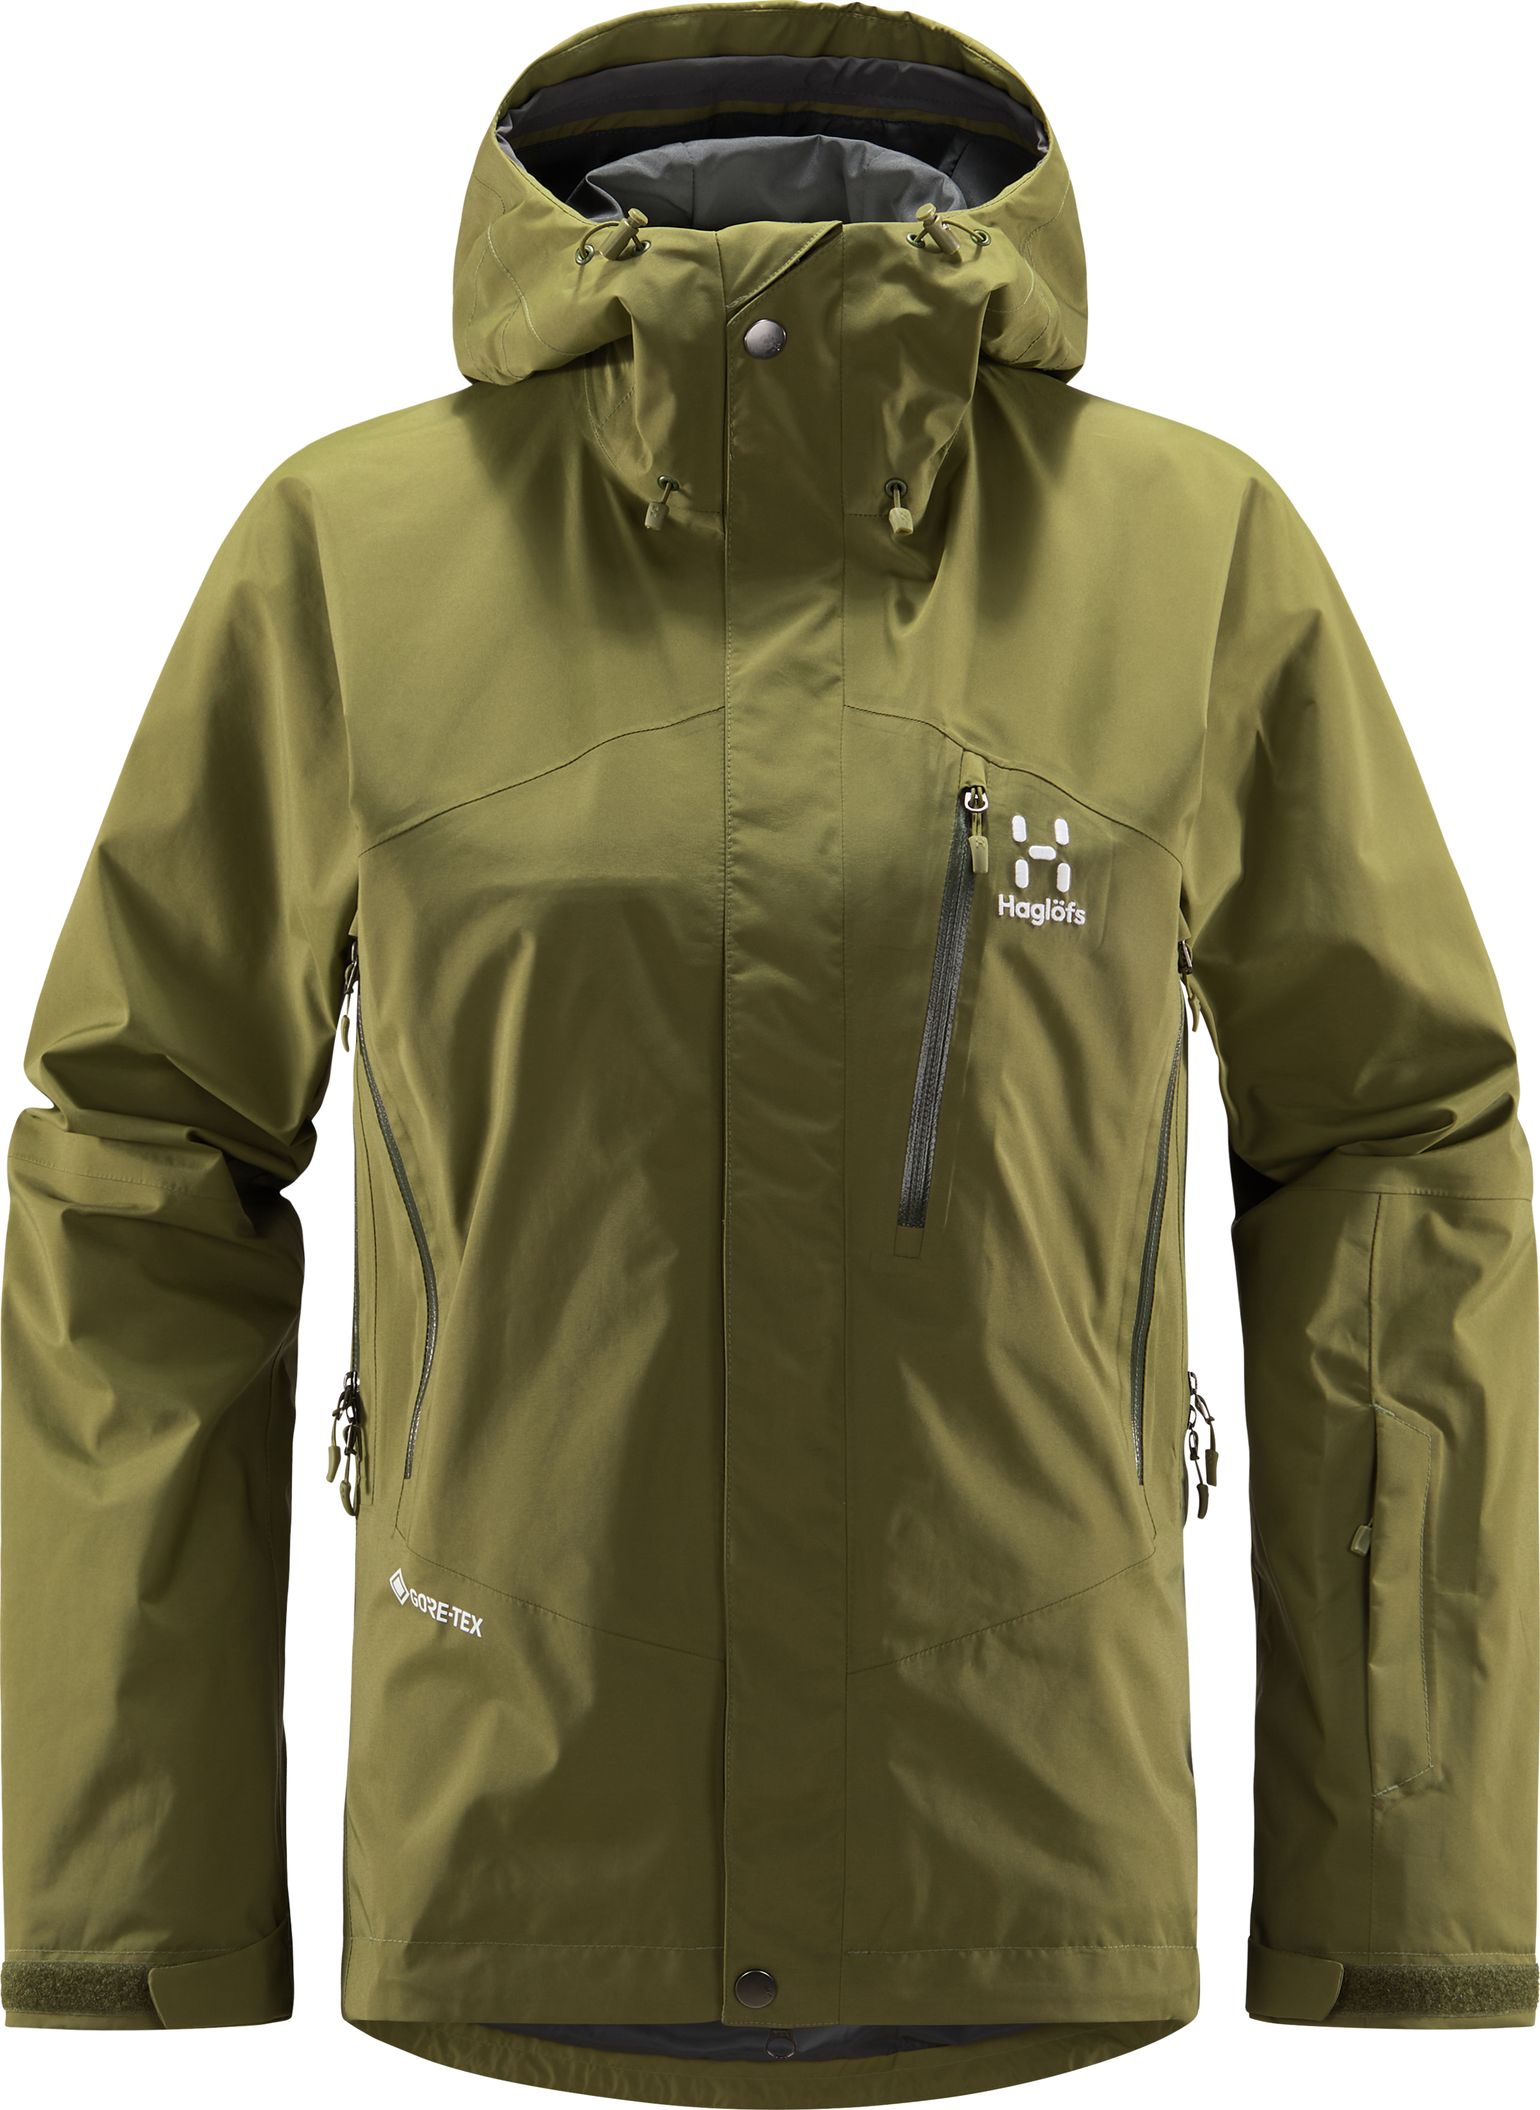 Women's Astral GORE-TEX Jacket Olive Green